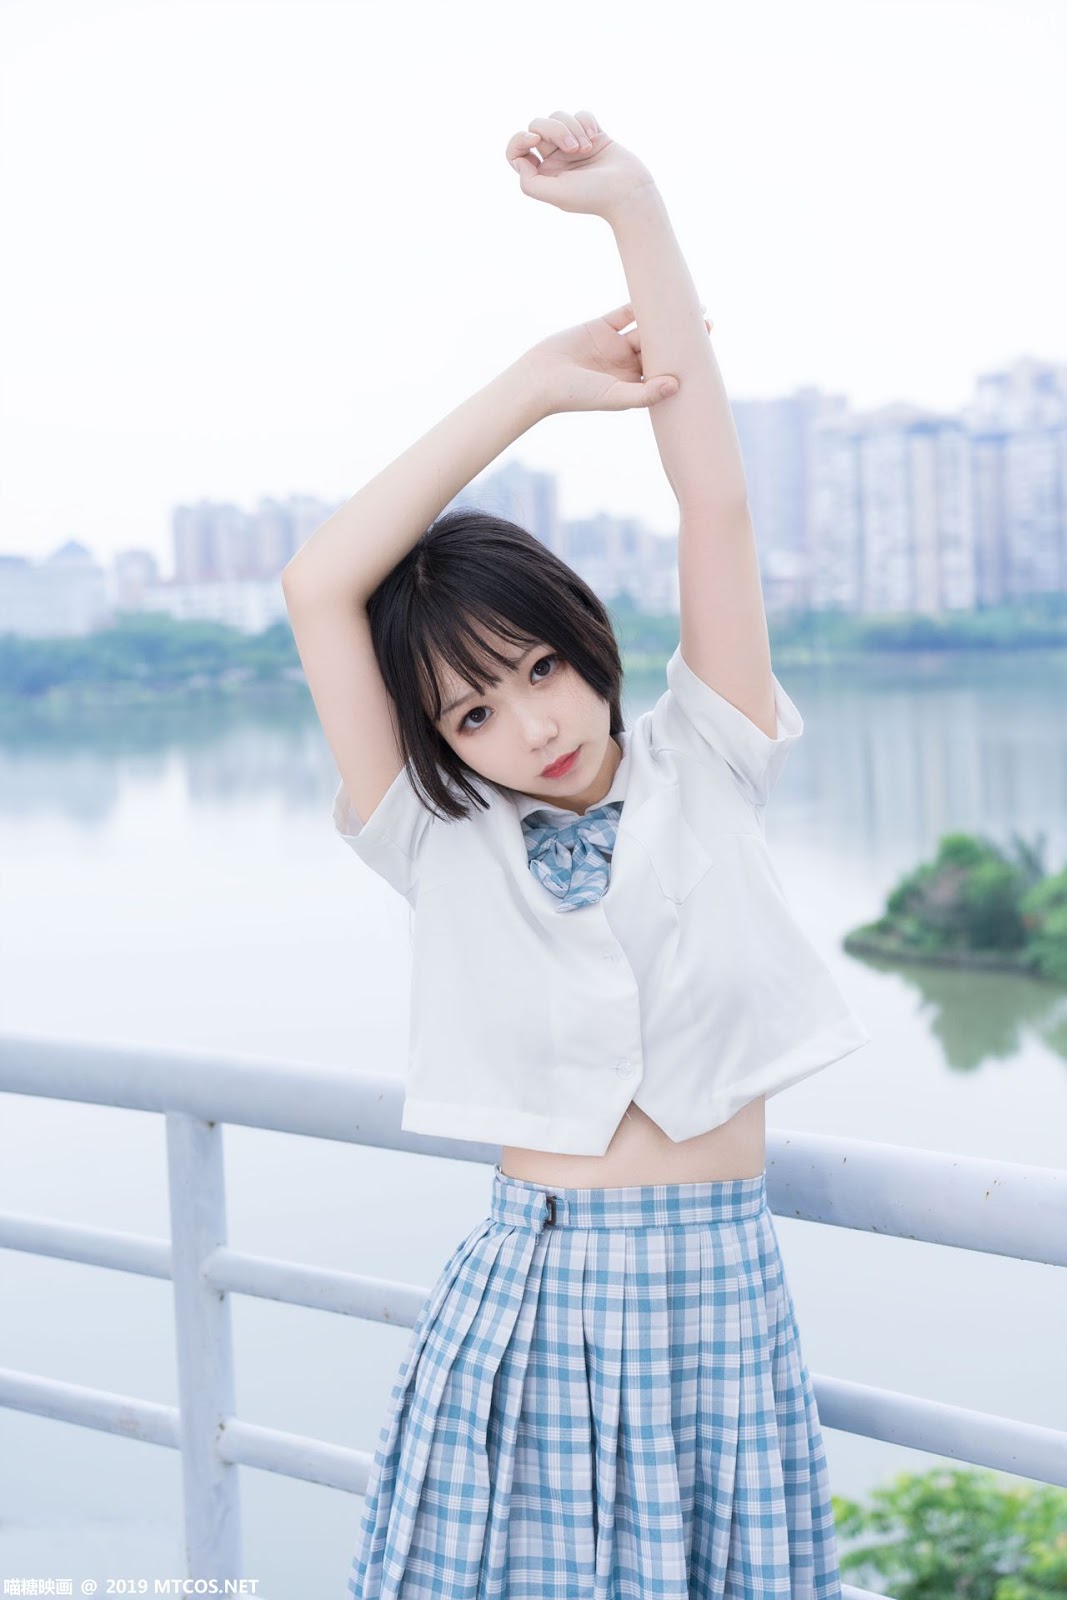 Image [MTCos] 喵糖映画 Vol.015 – Chinese Cute Model - White Shirt and Plaid Skirt - TruePic.net- Picture-41